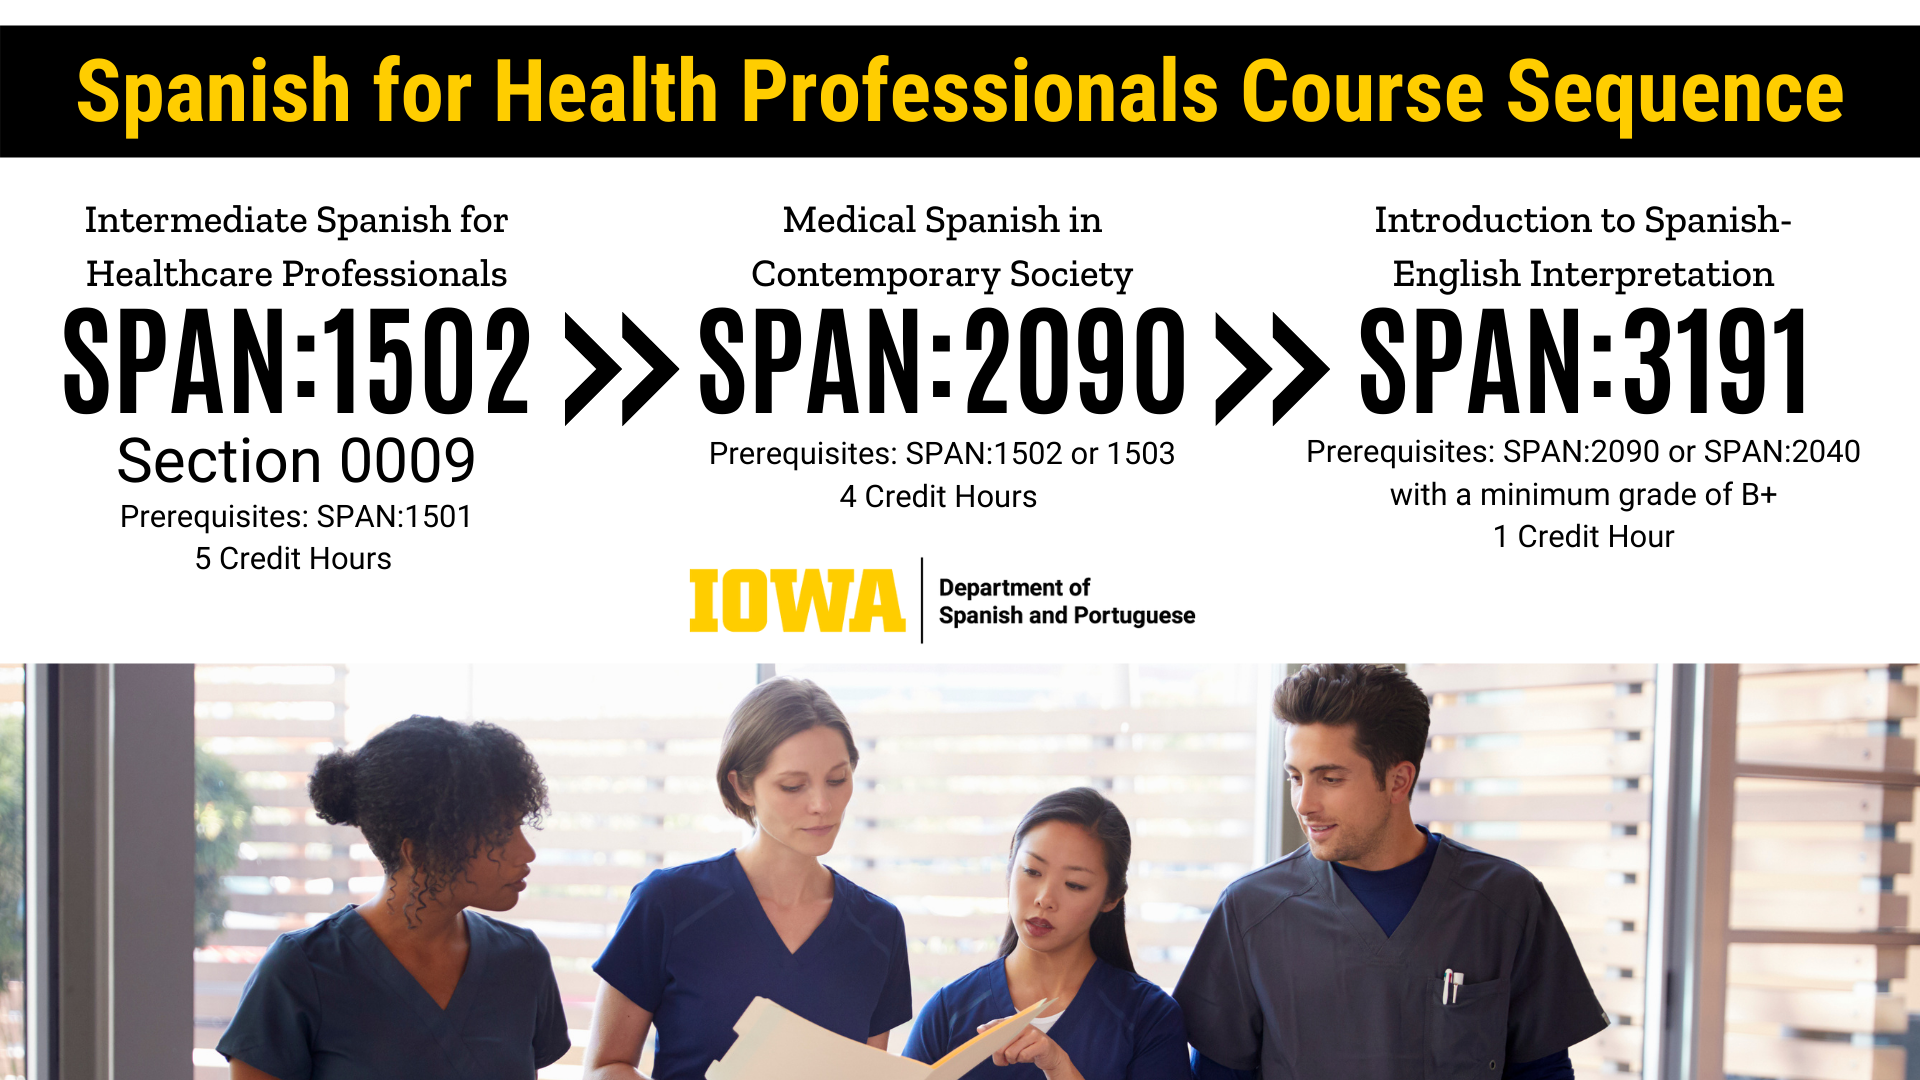 Spanish for Health Professionals Course Sequence. First in the sequence is Intermediate Spanish for Healthcare Professionals SPAN 1502 Section 0009 Prerequisites: SPAN 1501 5 Credit Hours. Next is Medical Spanish in Contemporary Society SPAN 2090 Prerequisites: SPAN 1502 or 1503 4 Credit Hours. Lastly is Introduction to Spanish-English Interpretation SPAN 3191 Prerequisites: SPAN 2090 or SPAN 2040 with a minimum grade of B plus 1 Credit Hour. Image below black text shows 4 heathcare professionals consulting a file while walking through the hallway.